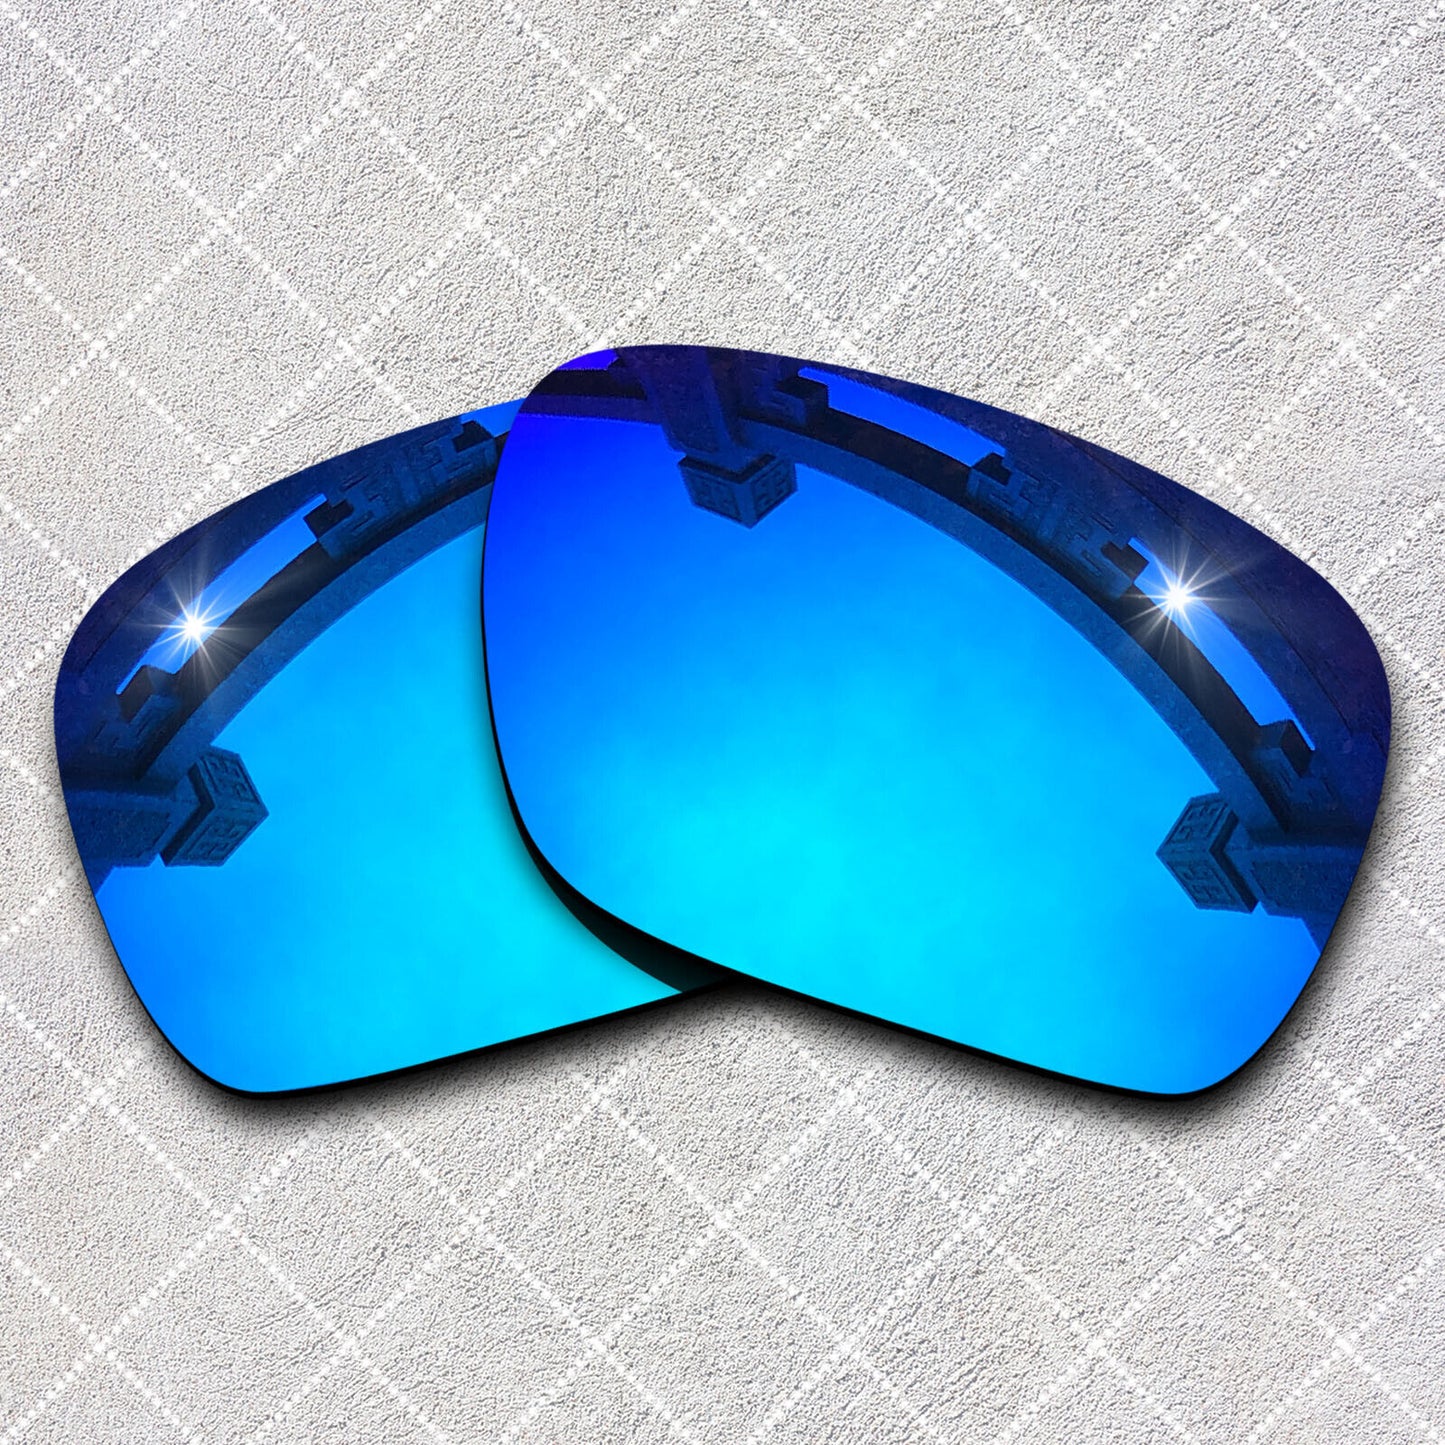 HeyRay Replacement Lenses for Sliver OO9262 Sunglasses Polarized -Opt